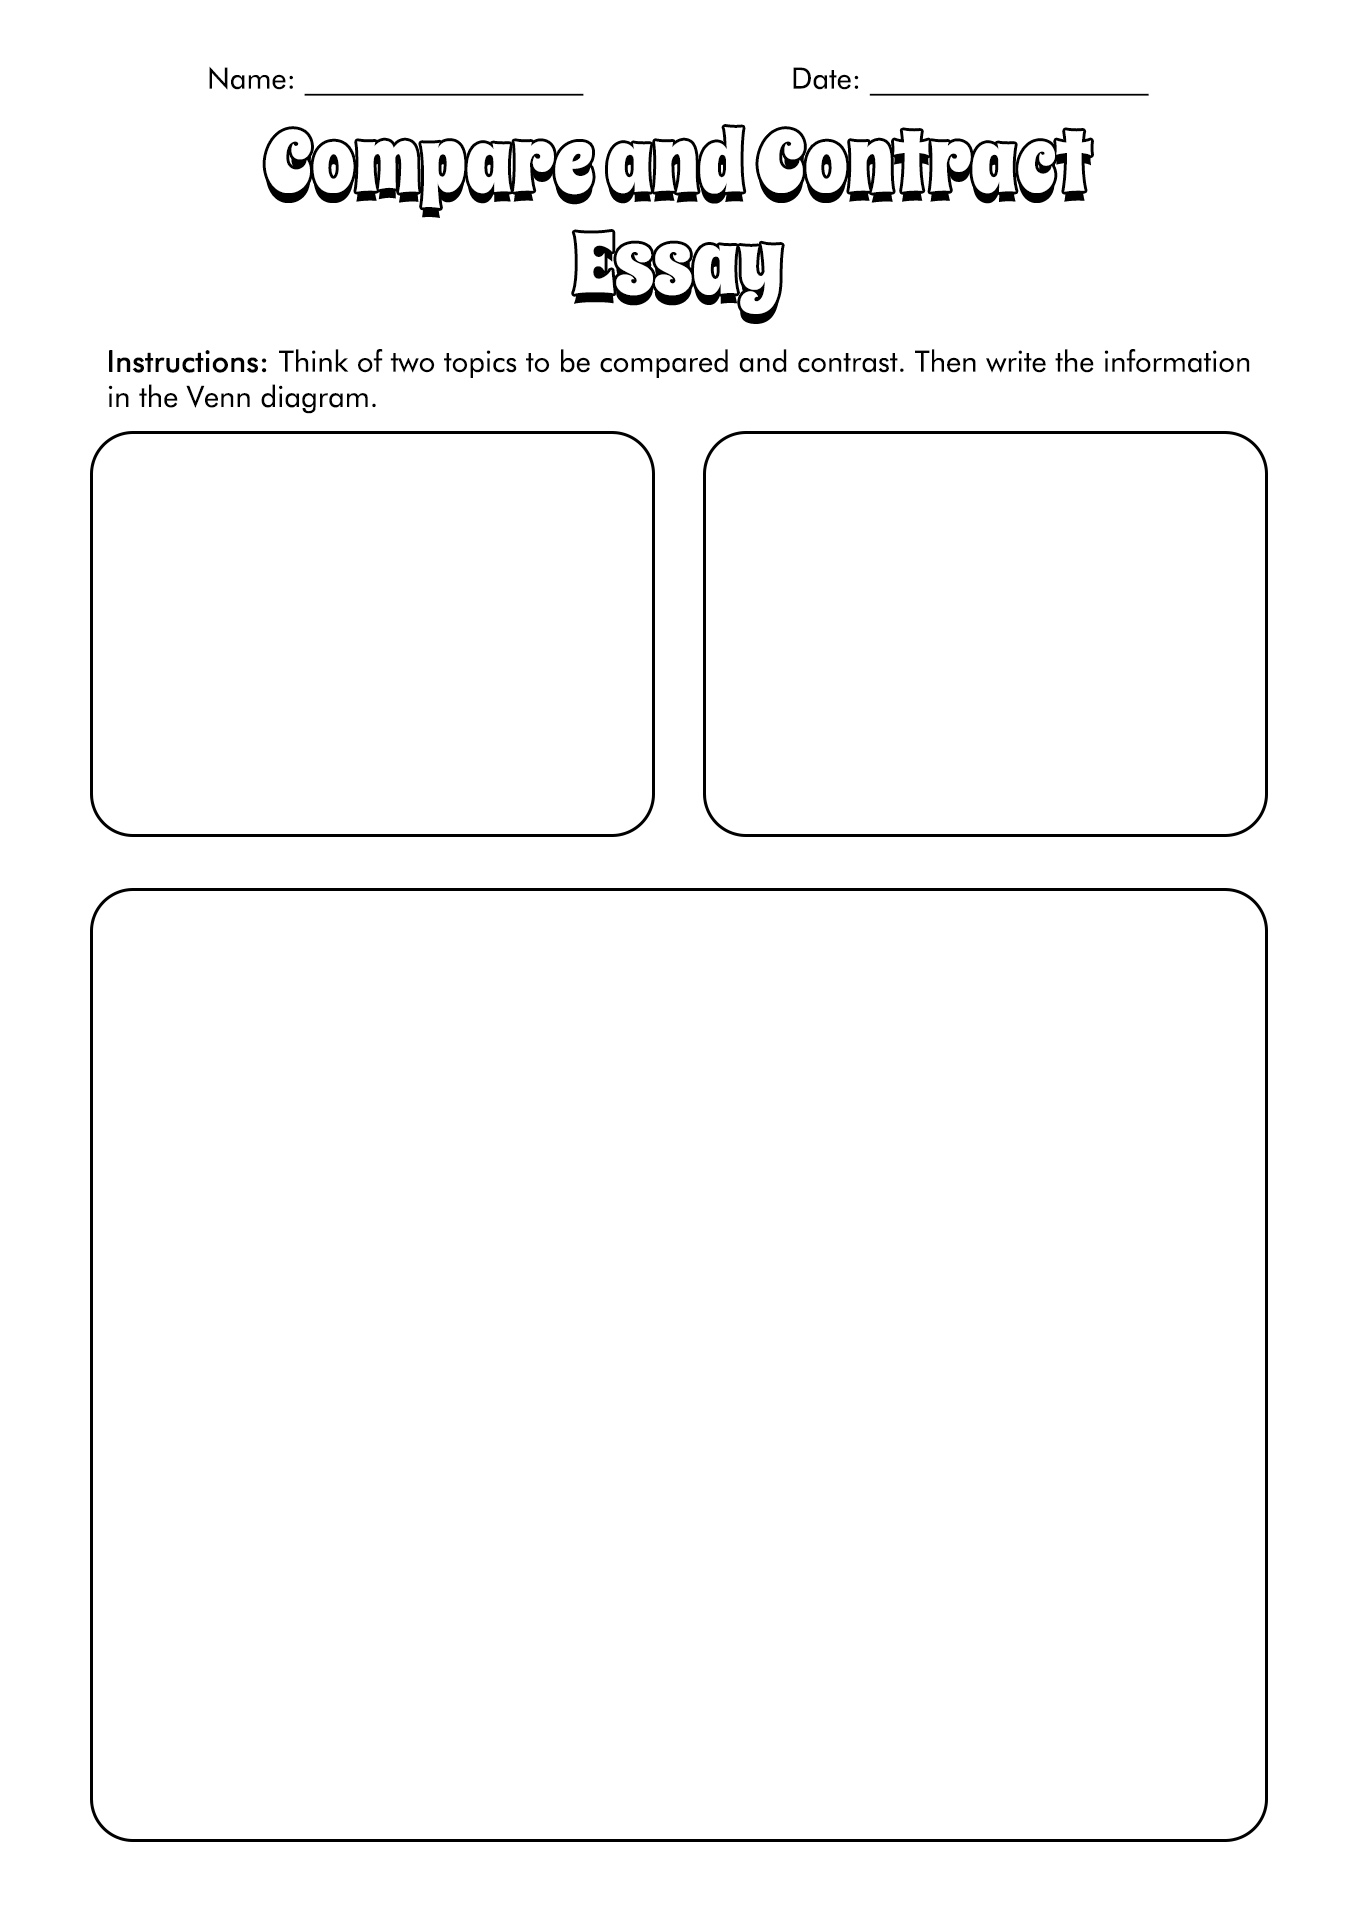 15-best-images-of-blank-compare-and-contrast-worksheets-compare-and-contrast-essay-worksheet